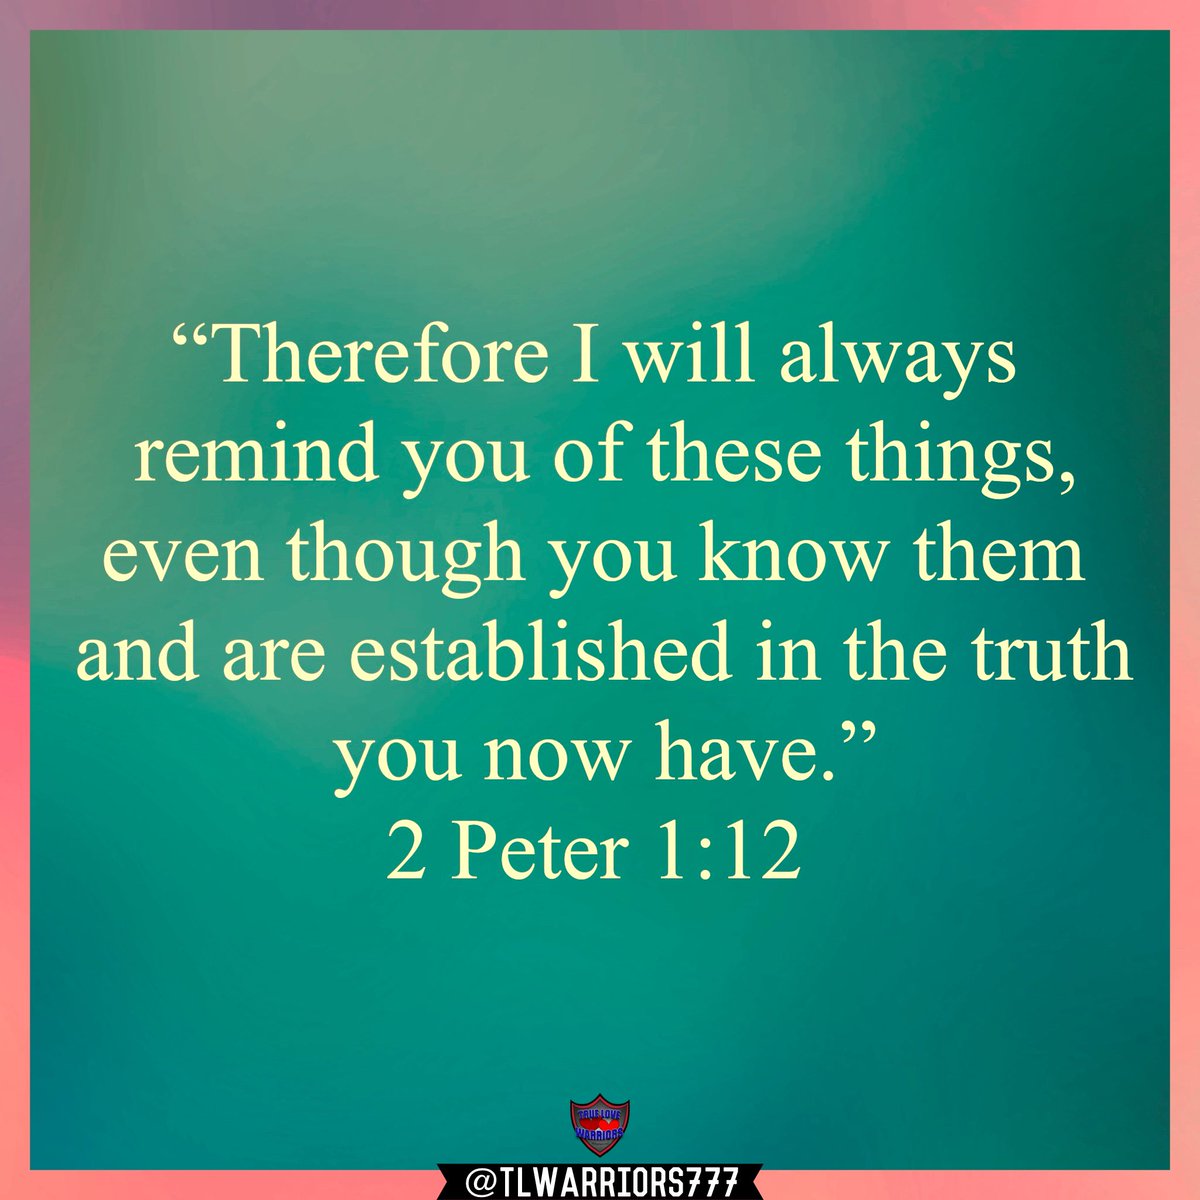 “Therefore I will always remind you of these things, even though you know them and are established in the truth you now have.” 2 Peter 1:12